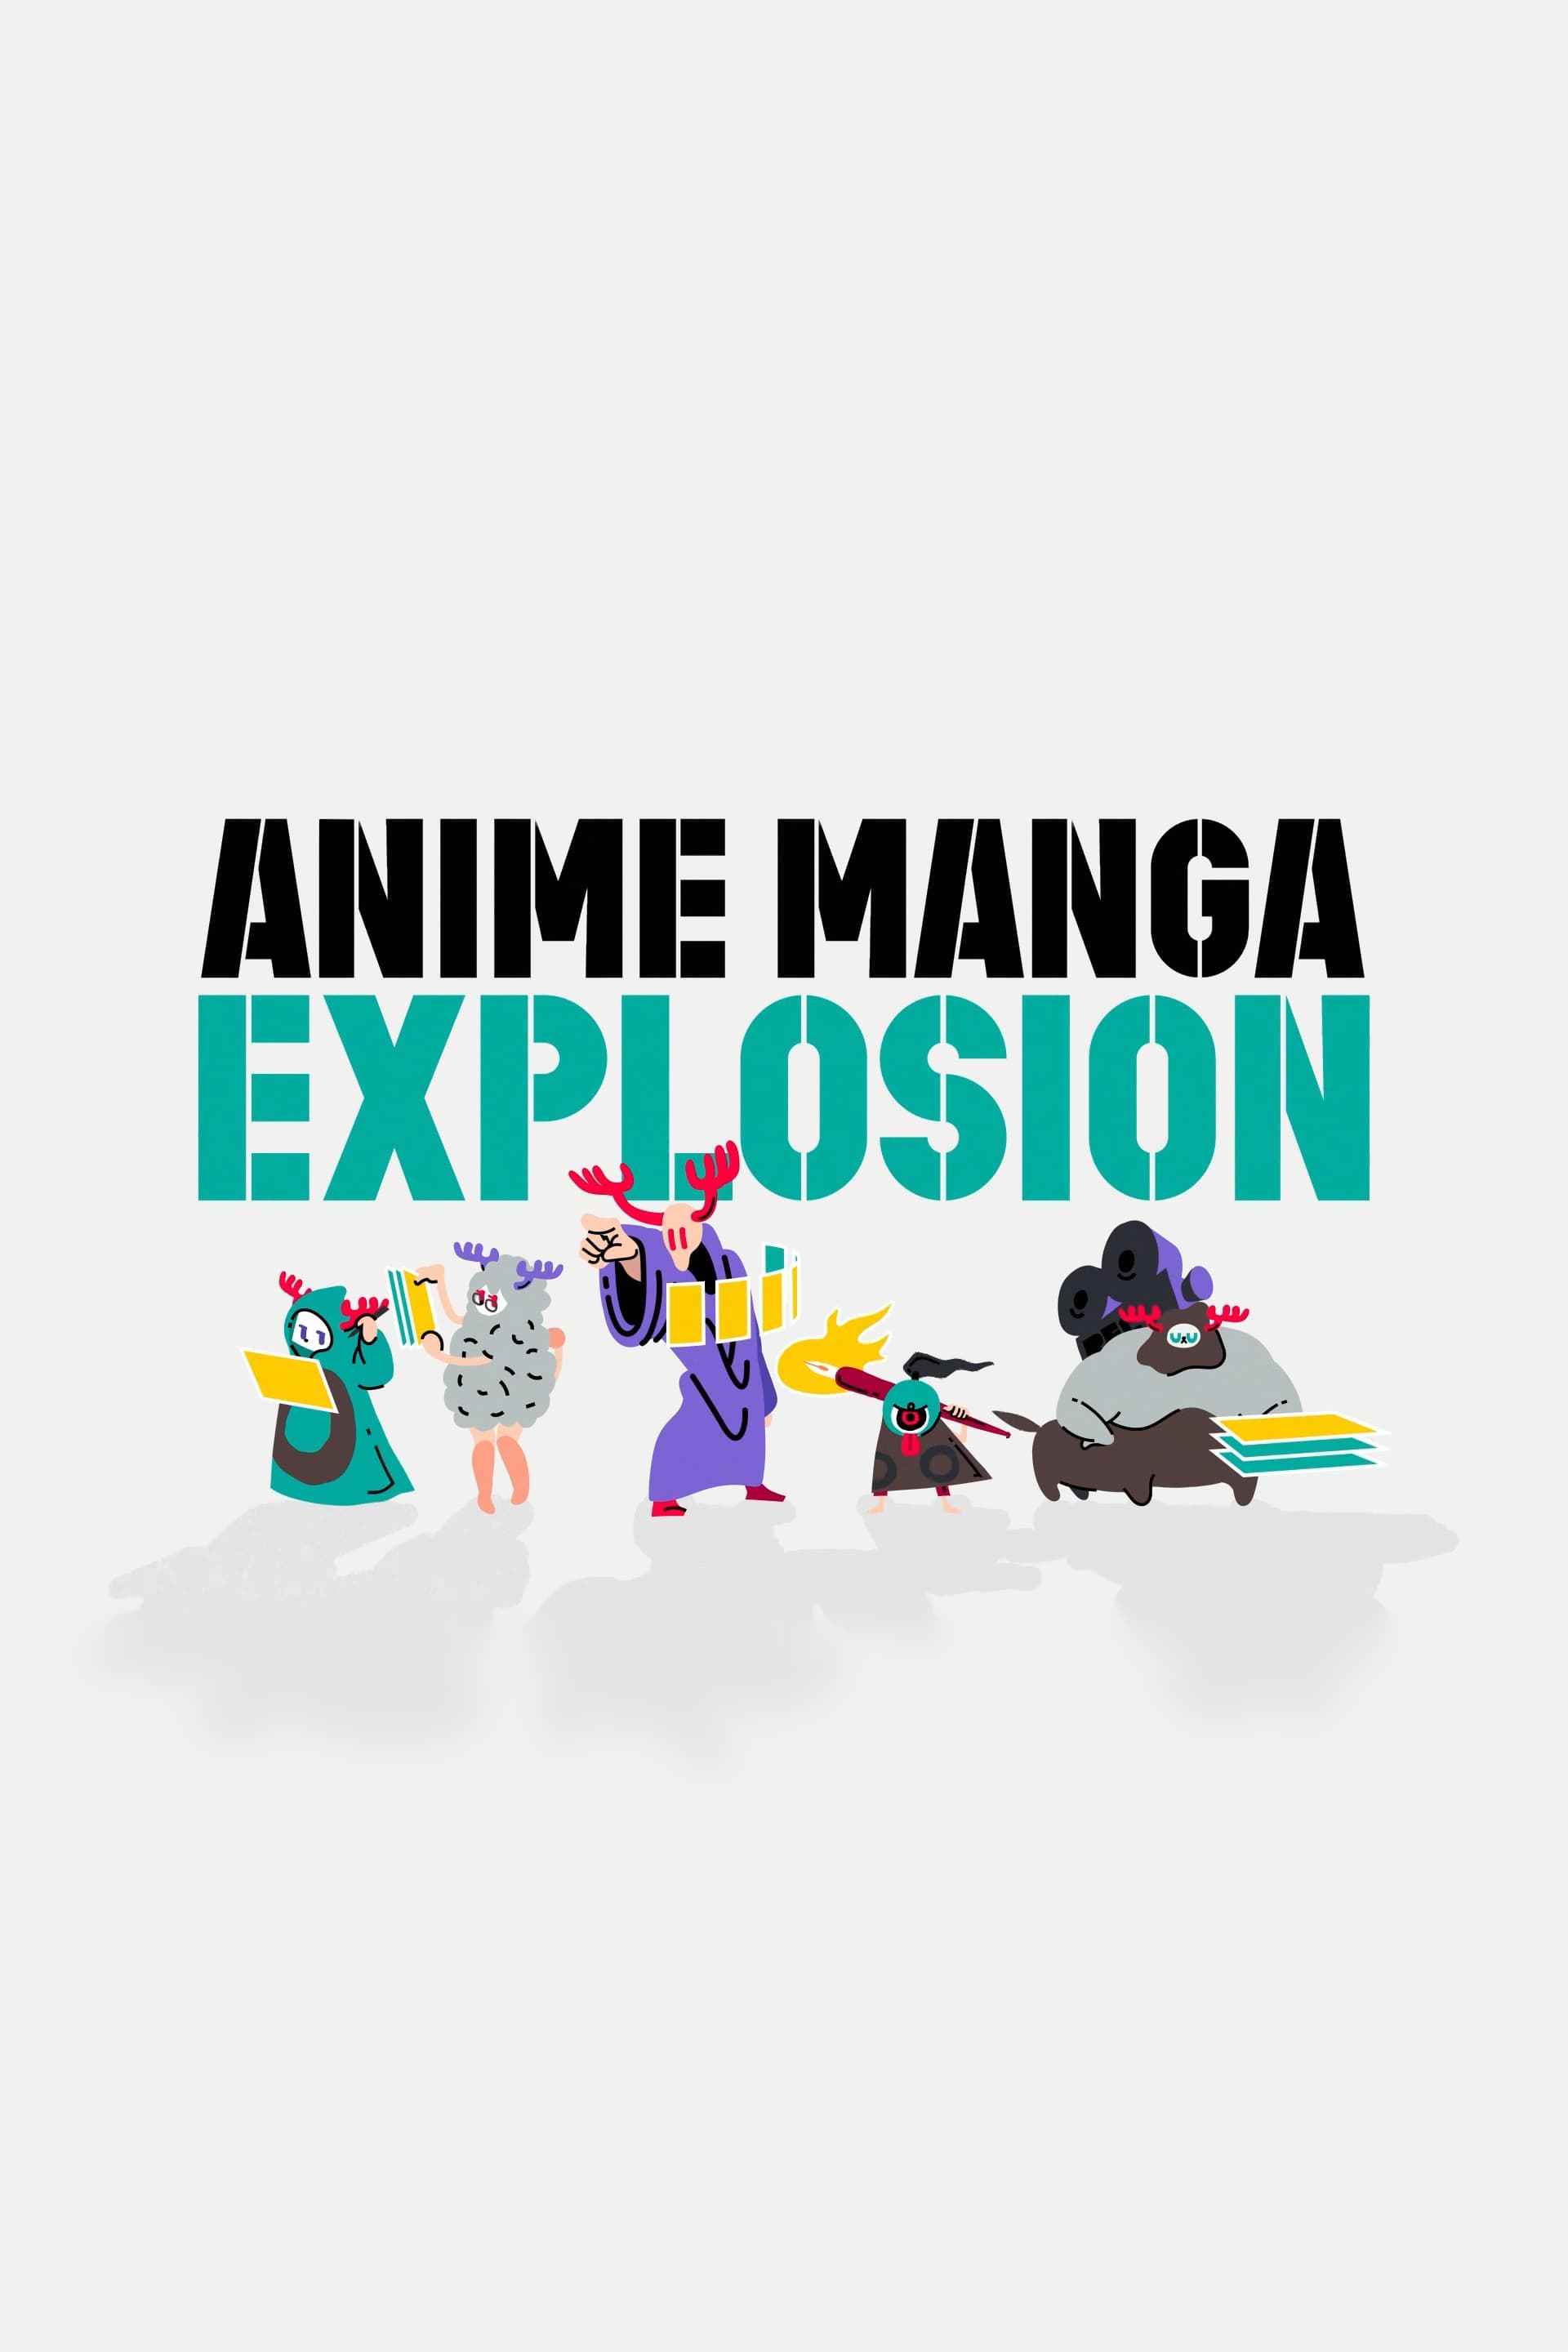 ANIME MANGA EXPLOSION TV Shows About Man